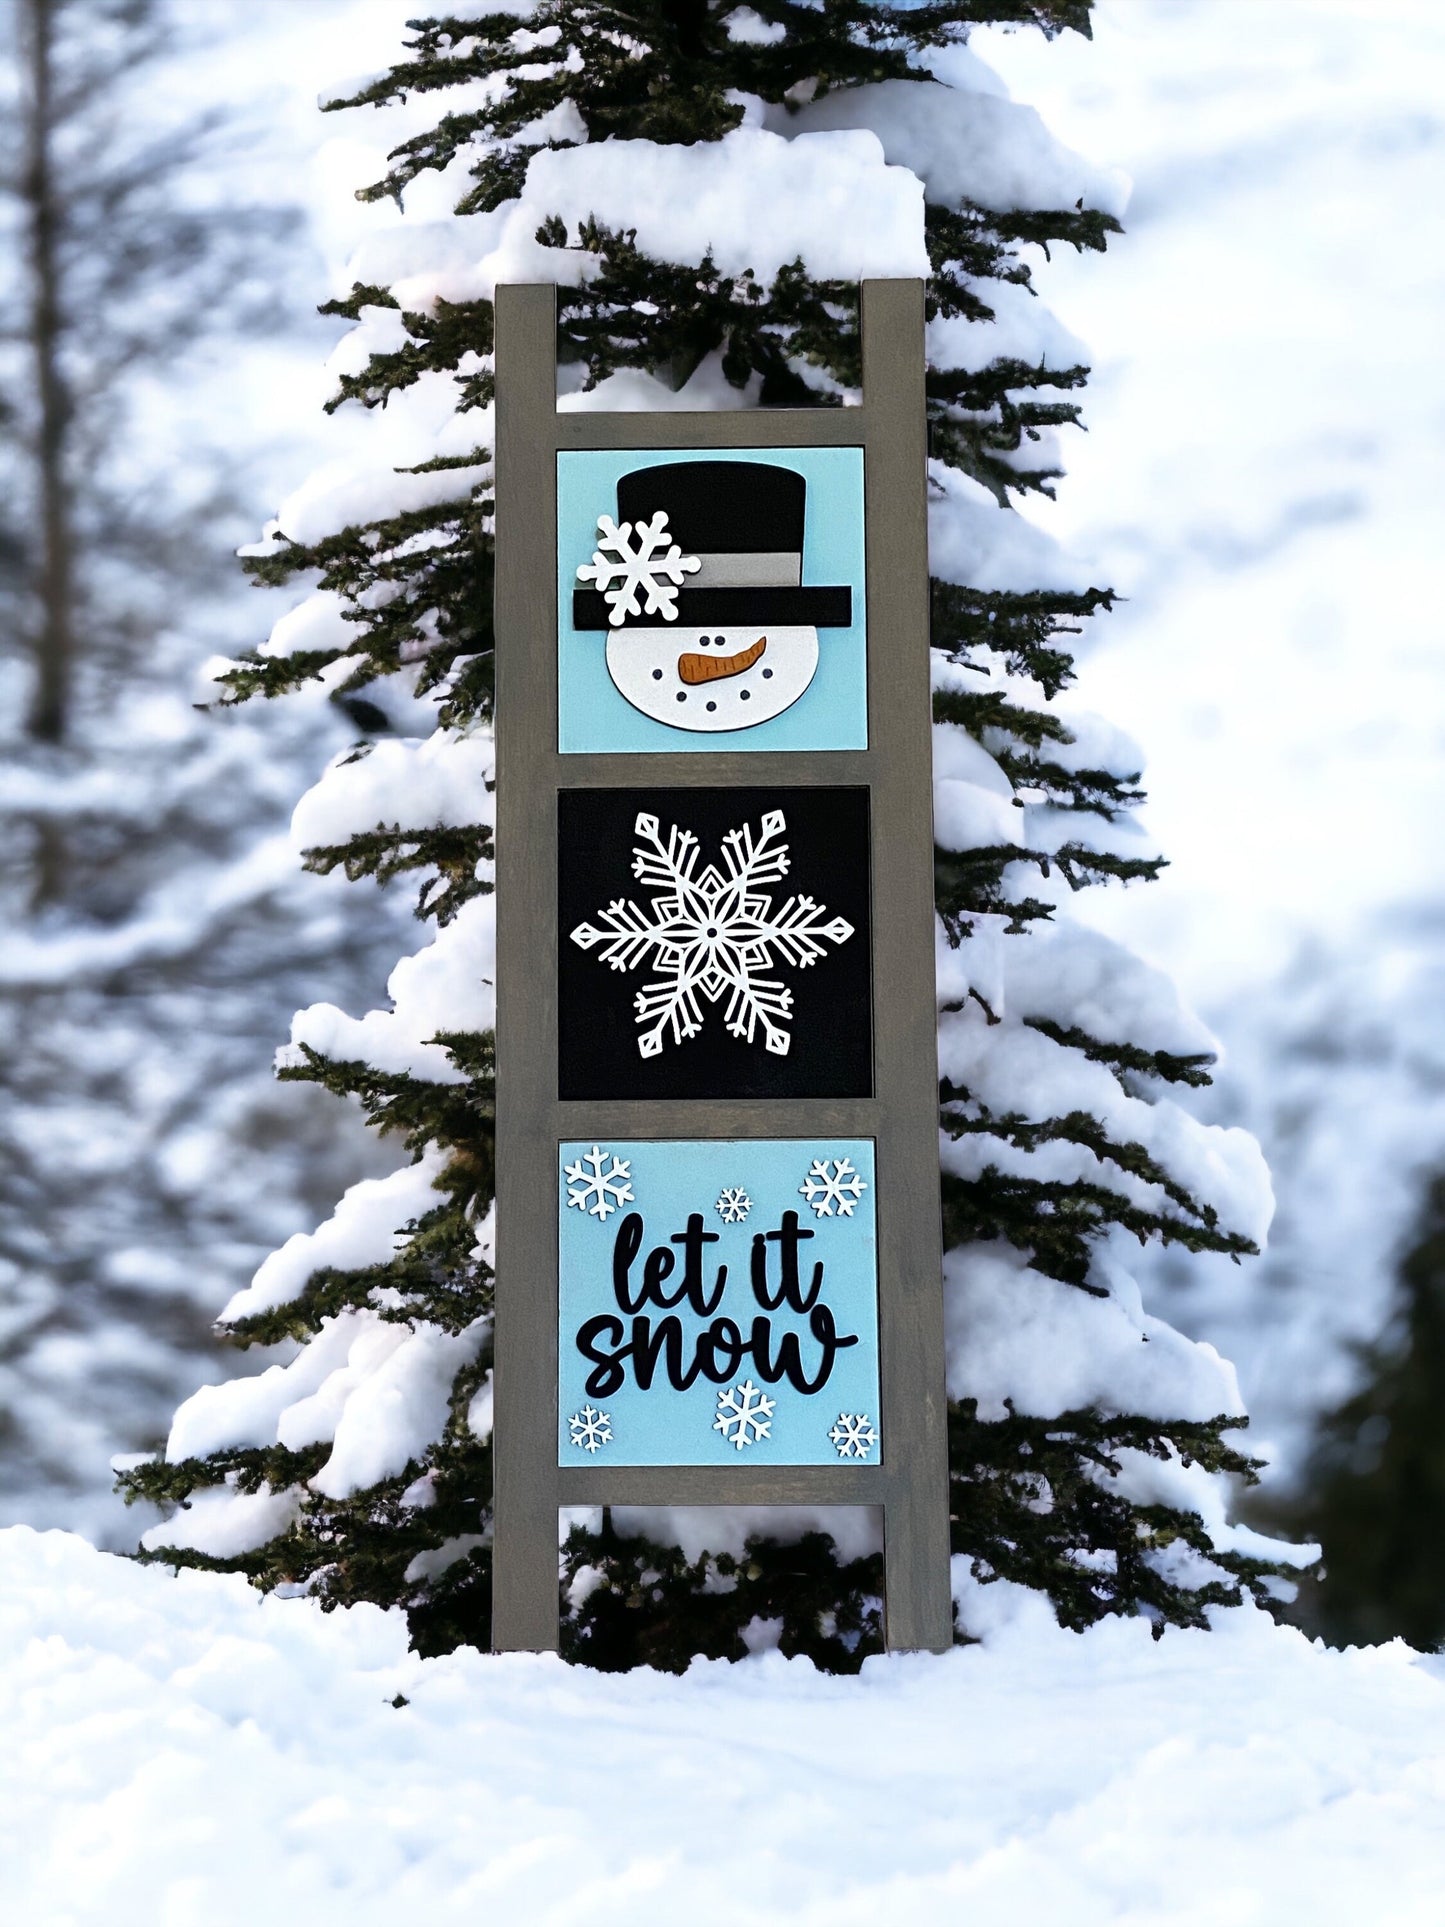 Let it Snow Winter Wonderland | Snowman Snowflake Interchangeable Tile Inserts for Leaning Ladder and Home Décor Sign